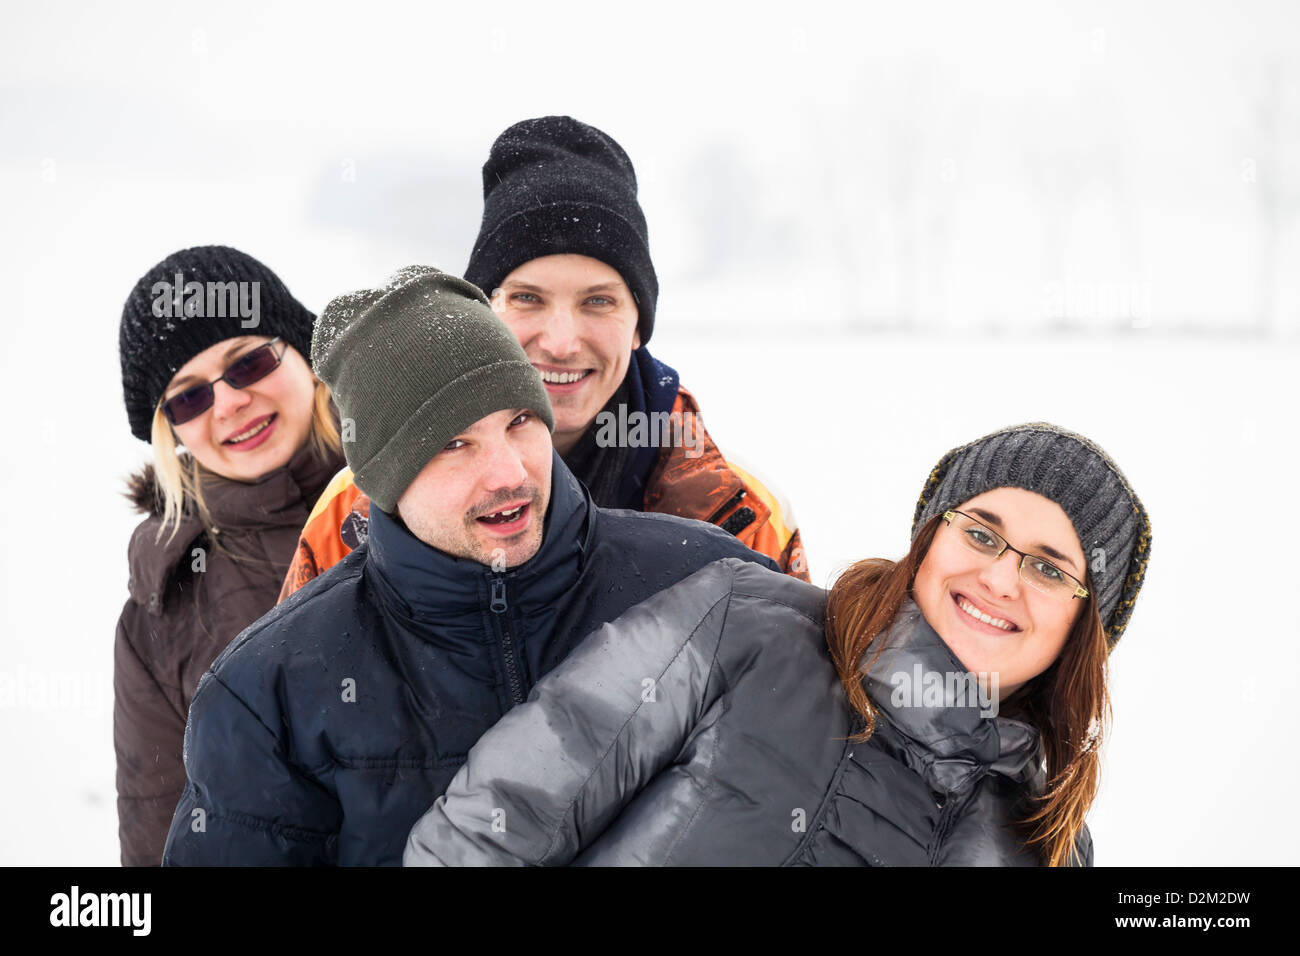 Group of young happy friends enjoying snow and winter. Stock Photo